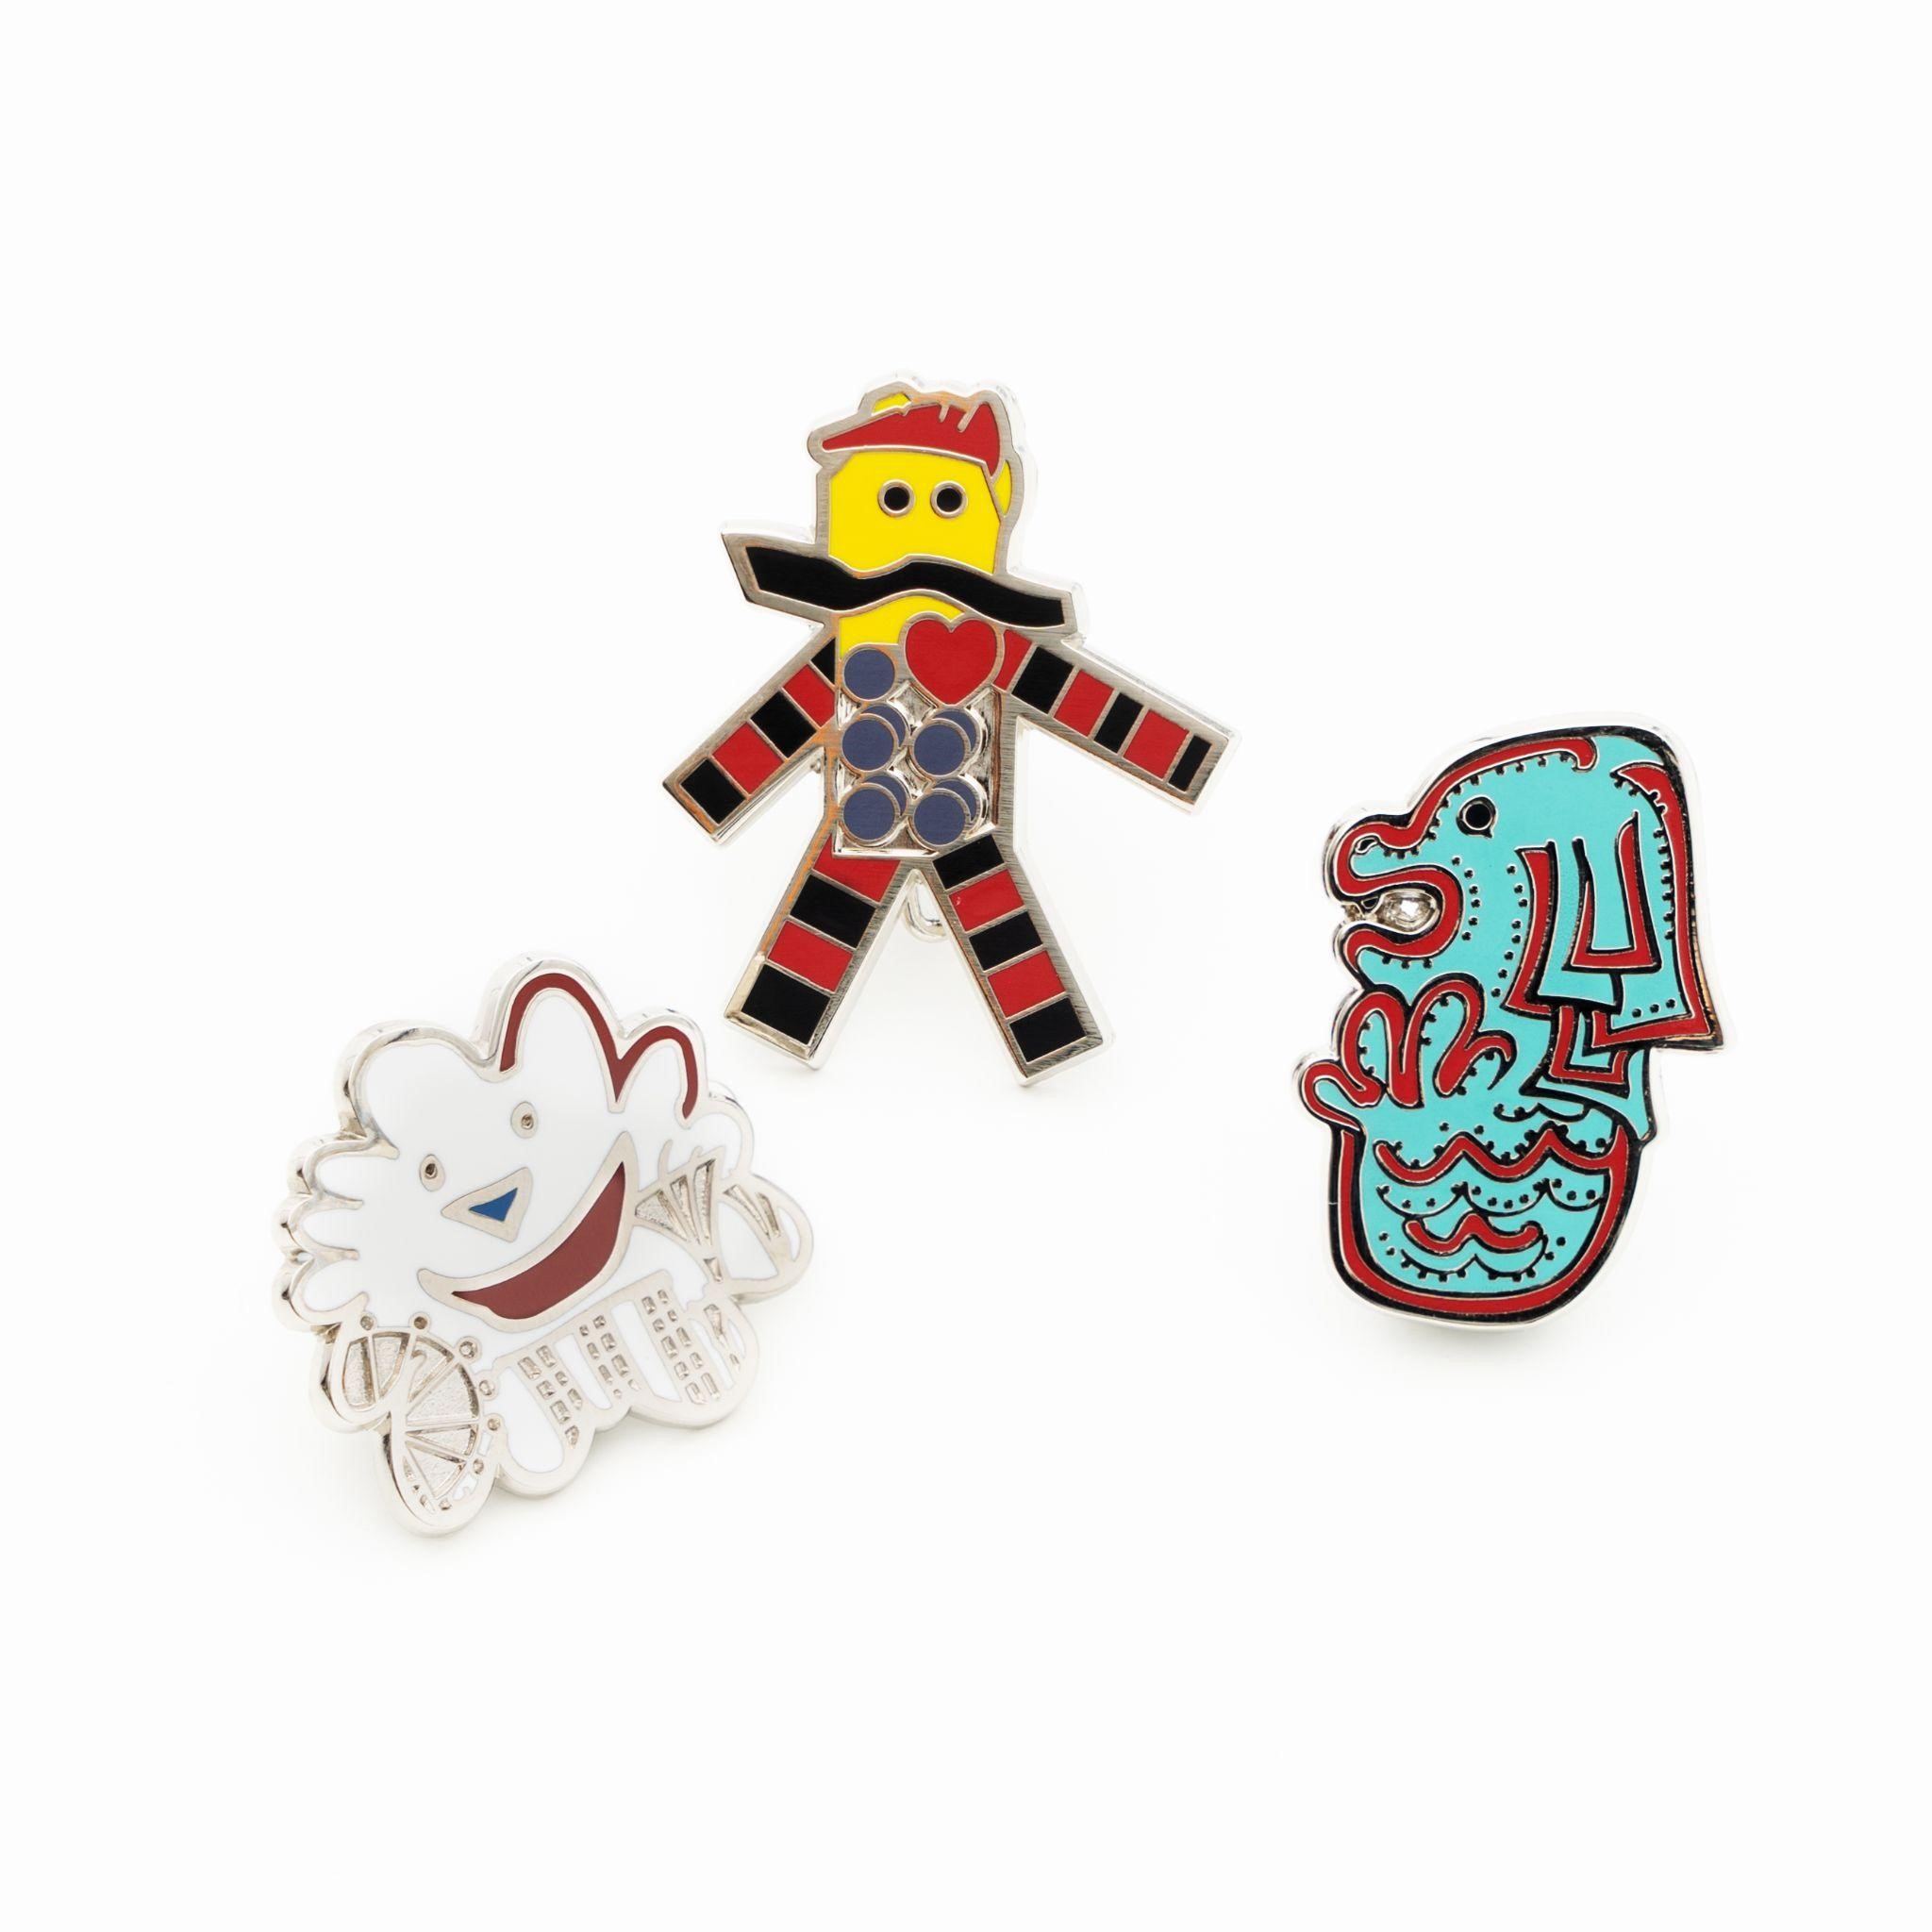 Enamel pins on white background, from left to right, Sunnie, Bricko and Whaat 